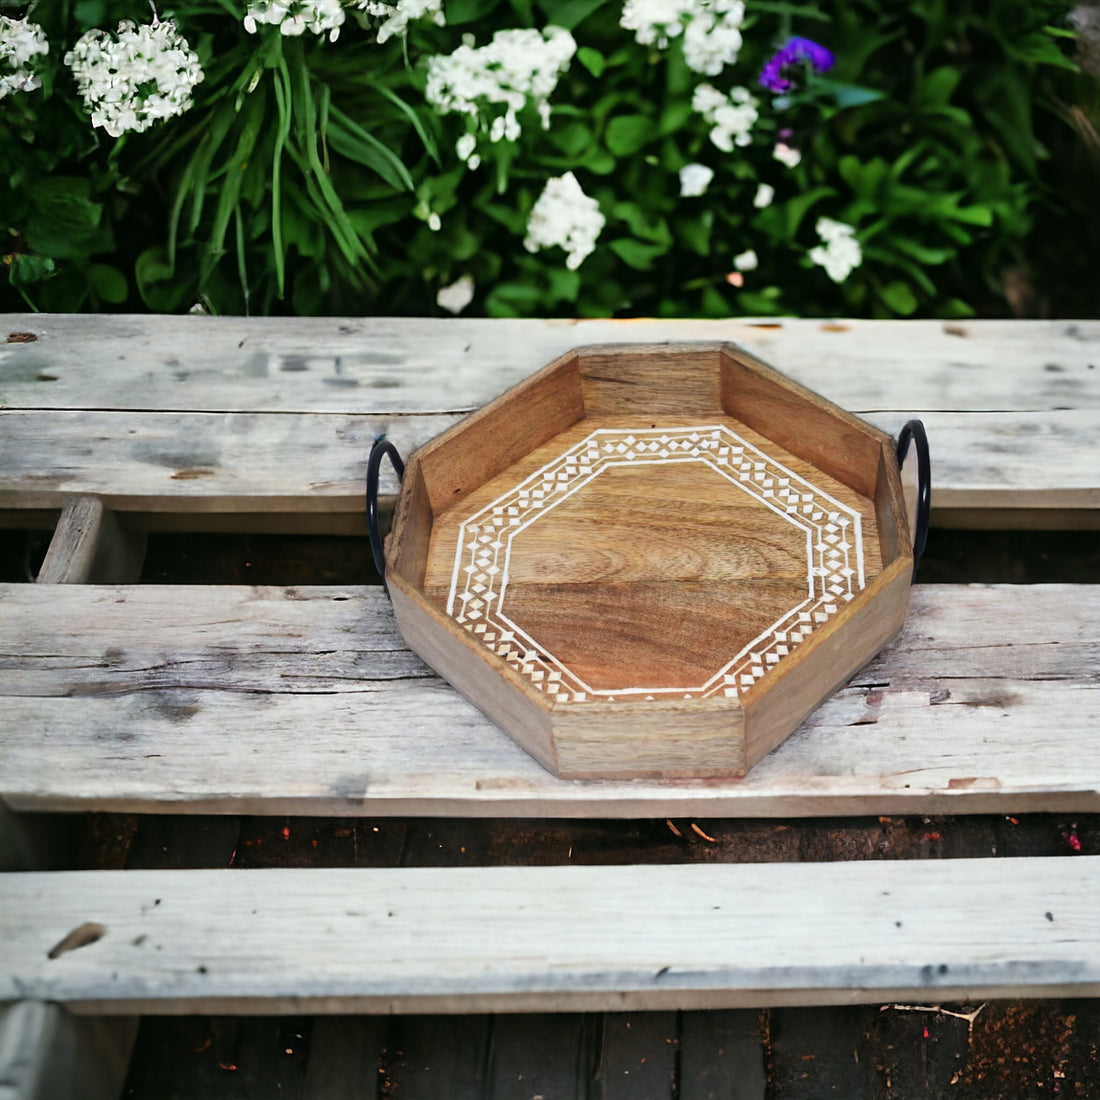 Wooden Carved Hexagon Tray with Metal handle